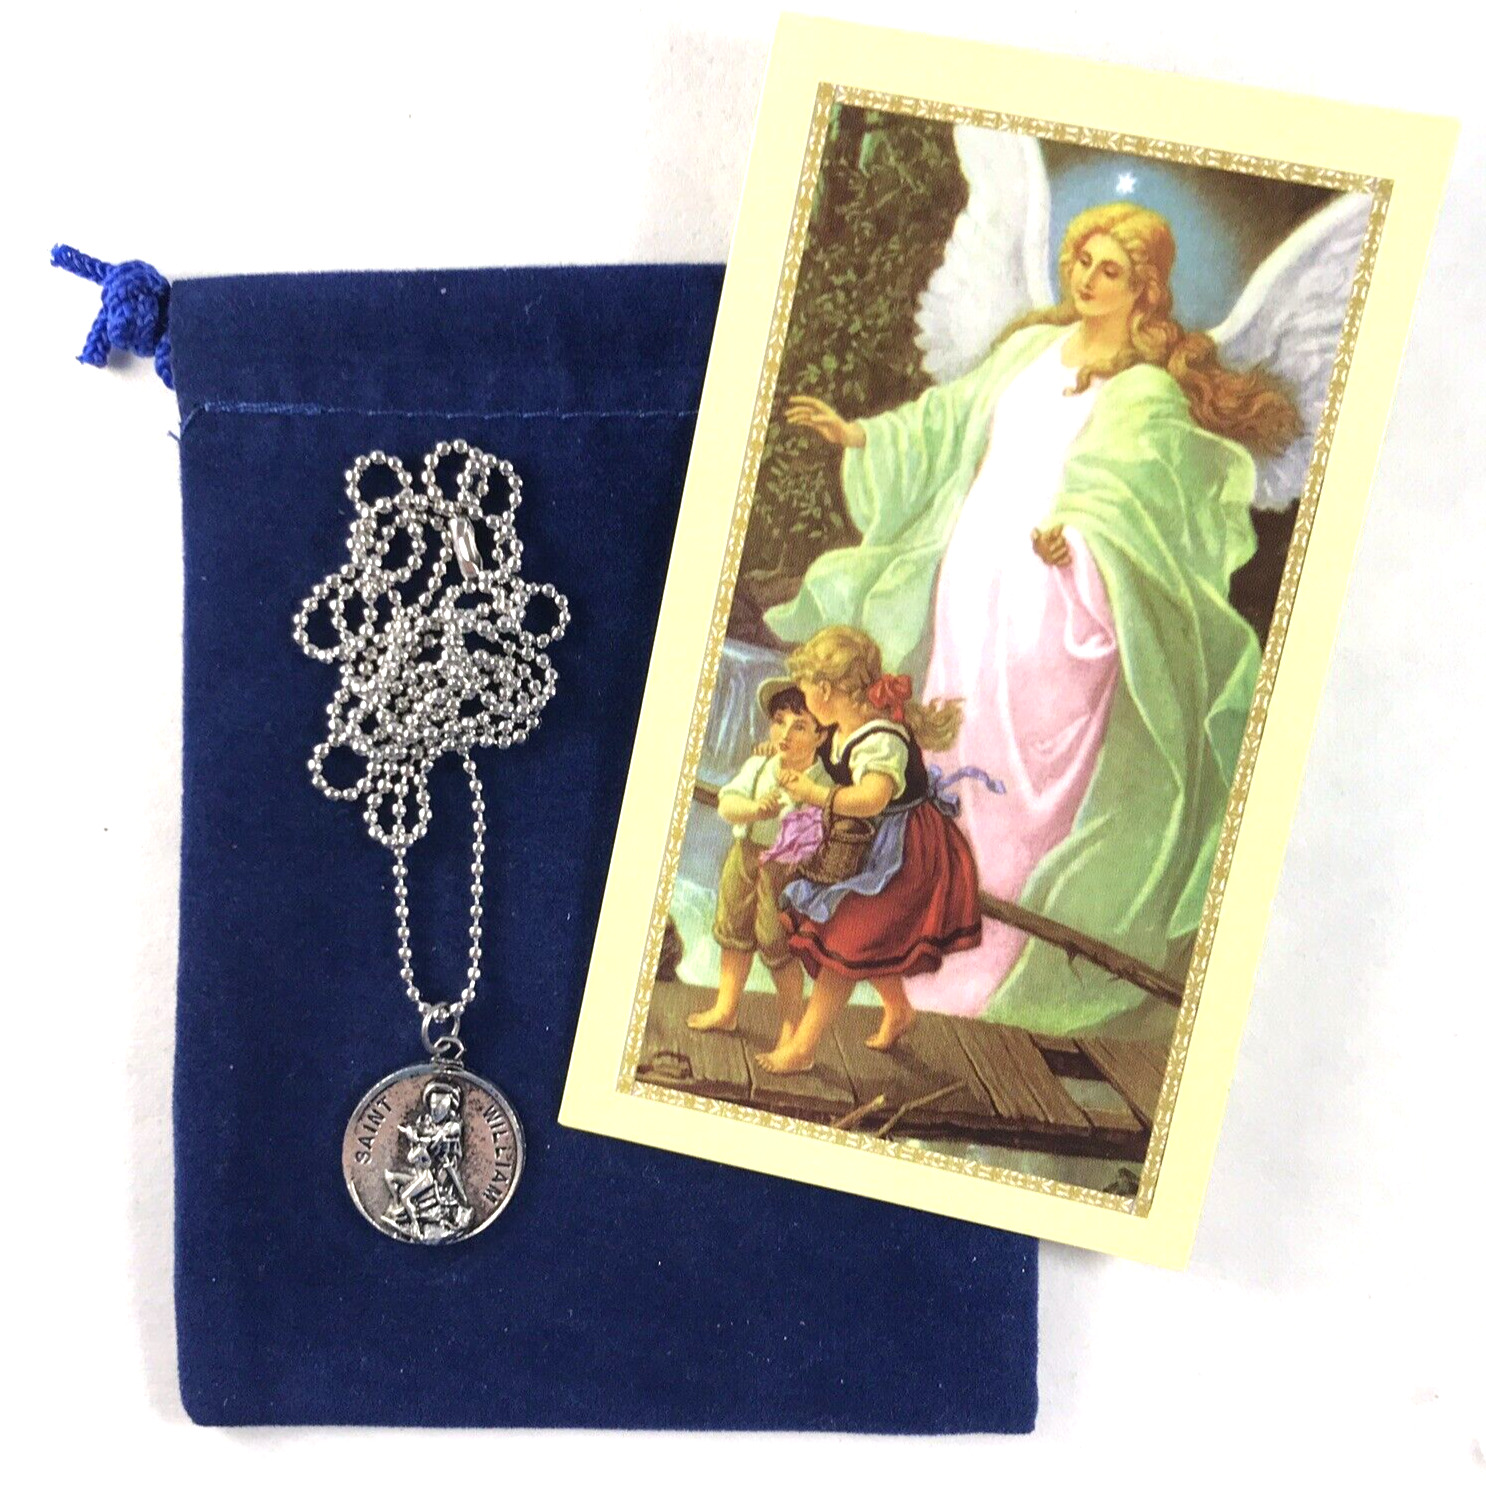 ST. SAINT WILLIAM MEDAL PATRON OF ADOPTED CHILDREN